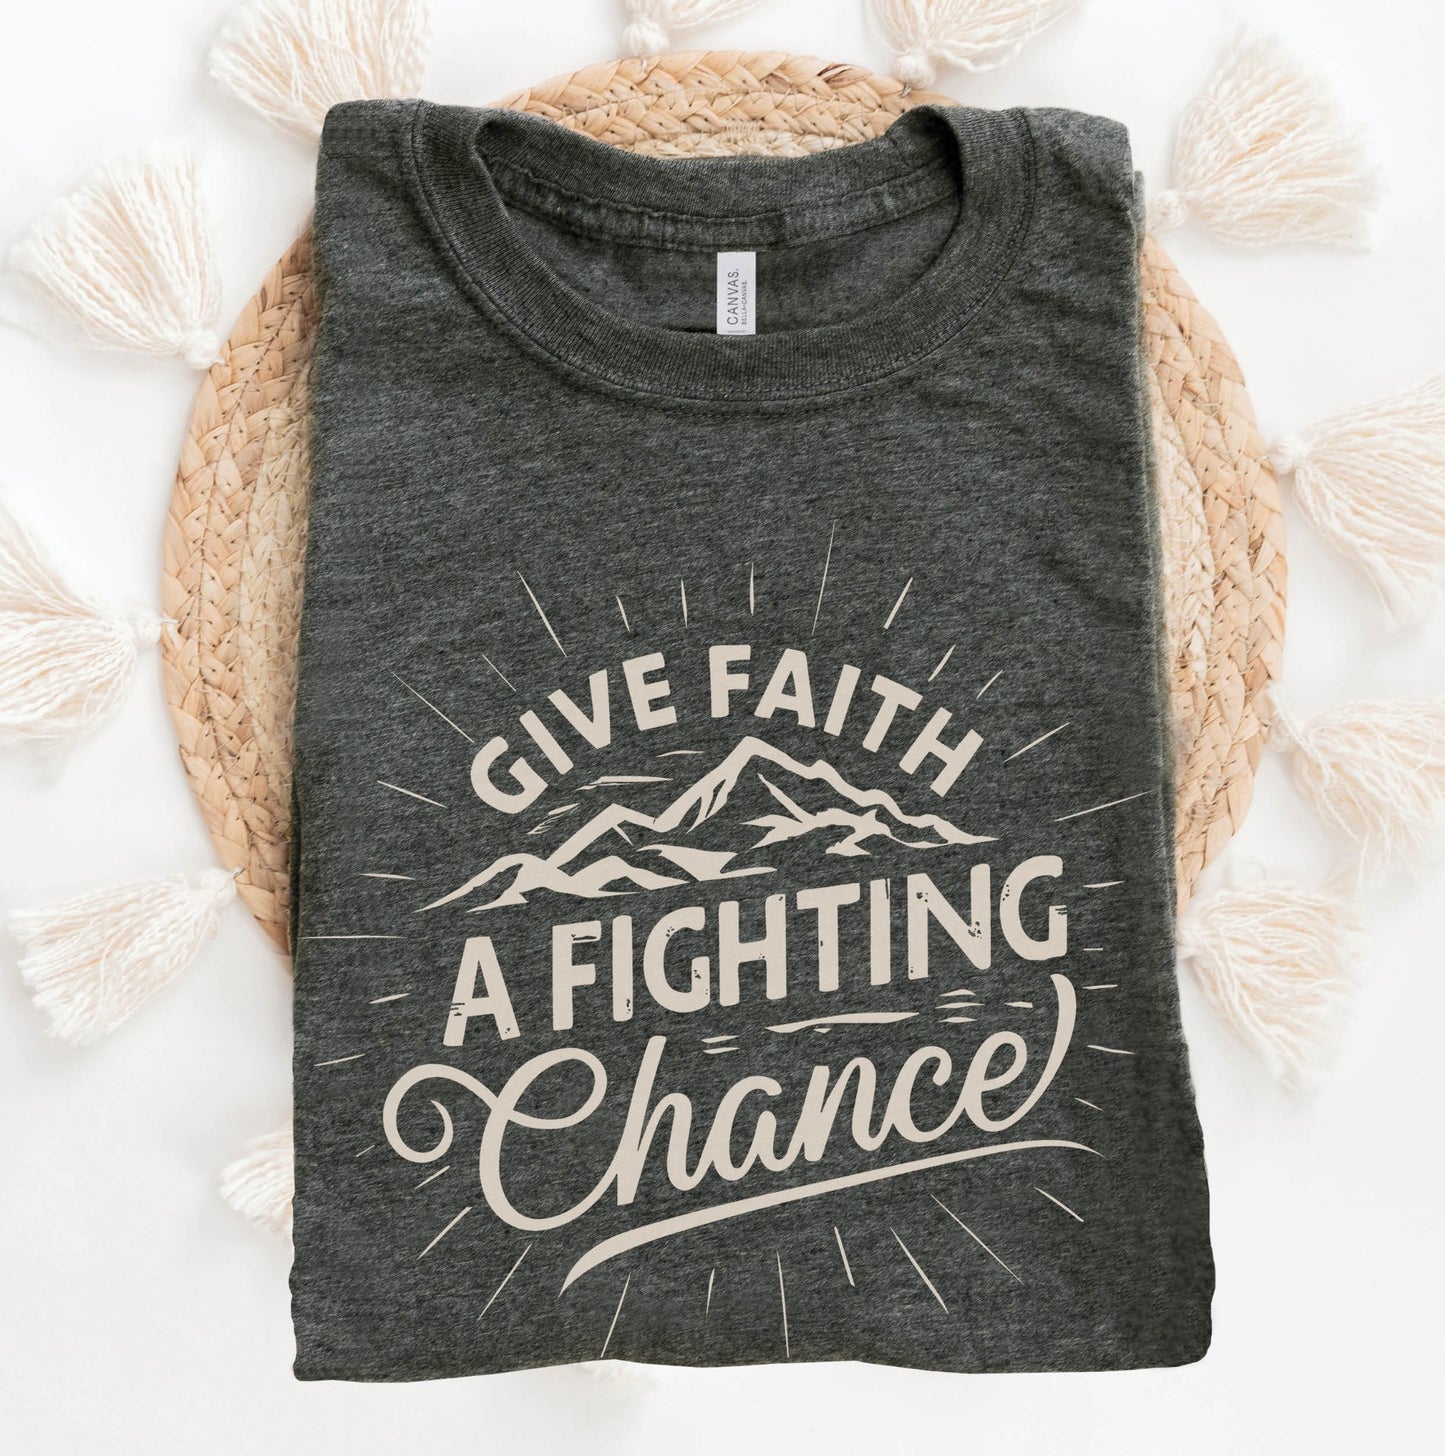 Heather Dark Gray Unisex Tee with Christian Bible verse quote that says, "Give Faith A Fighting Chance" with retro sunburst and mountain graphics, designed for faith-based men and women